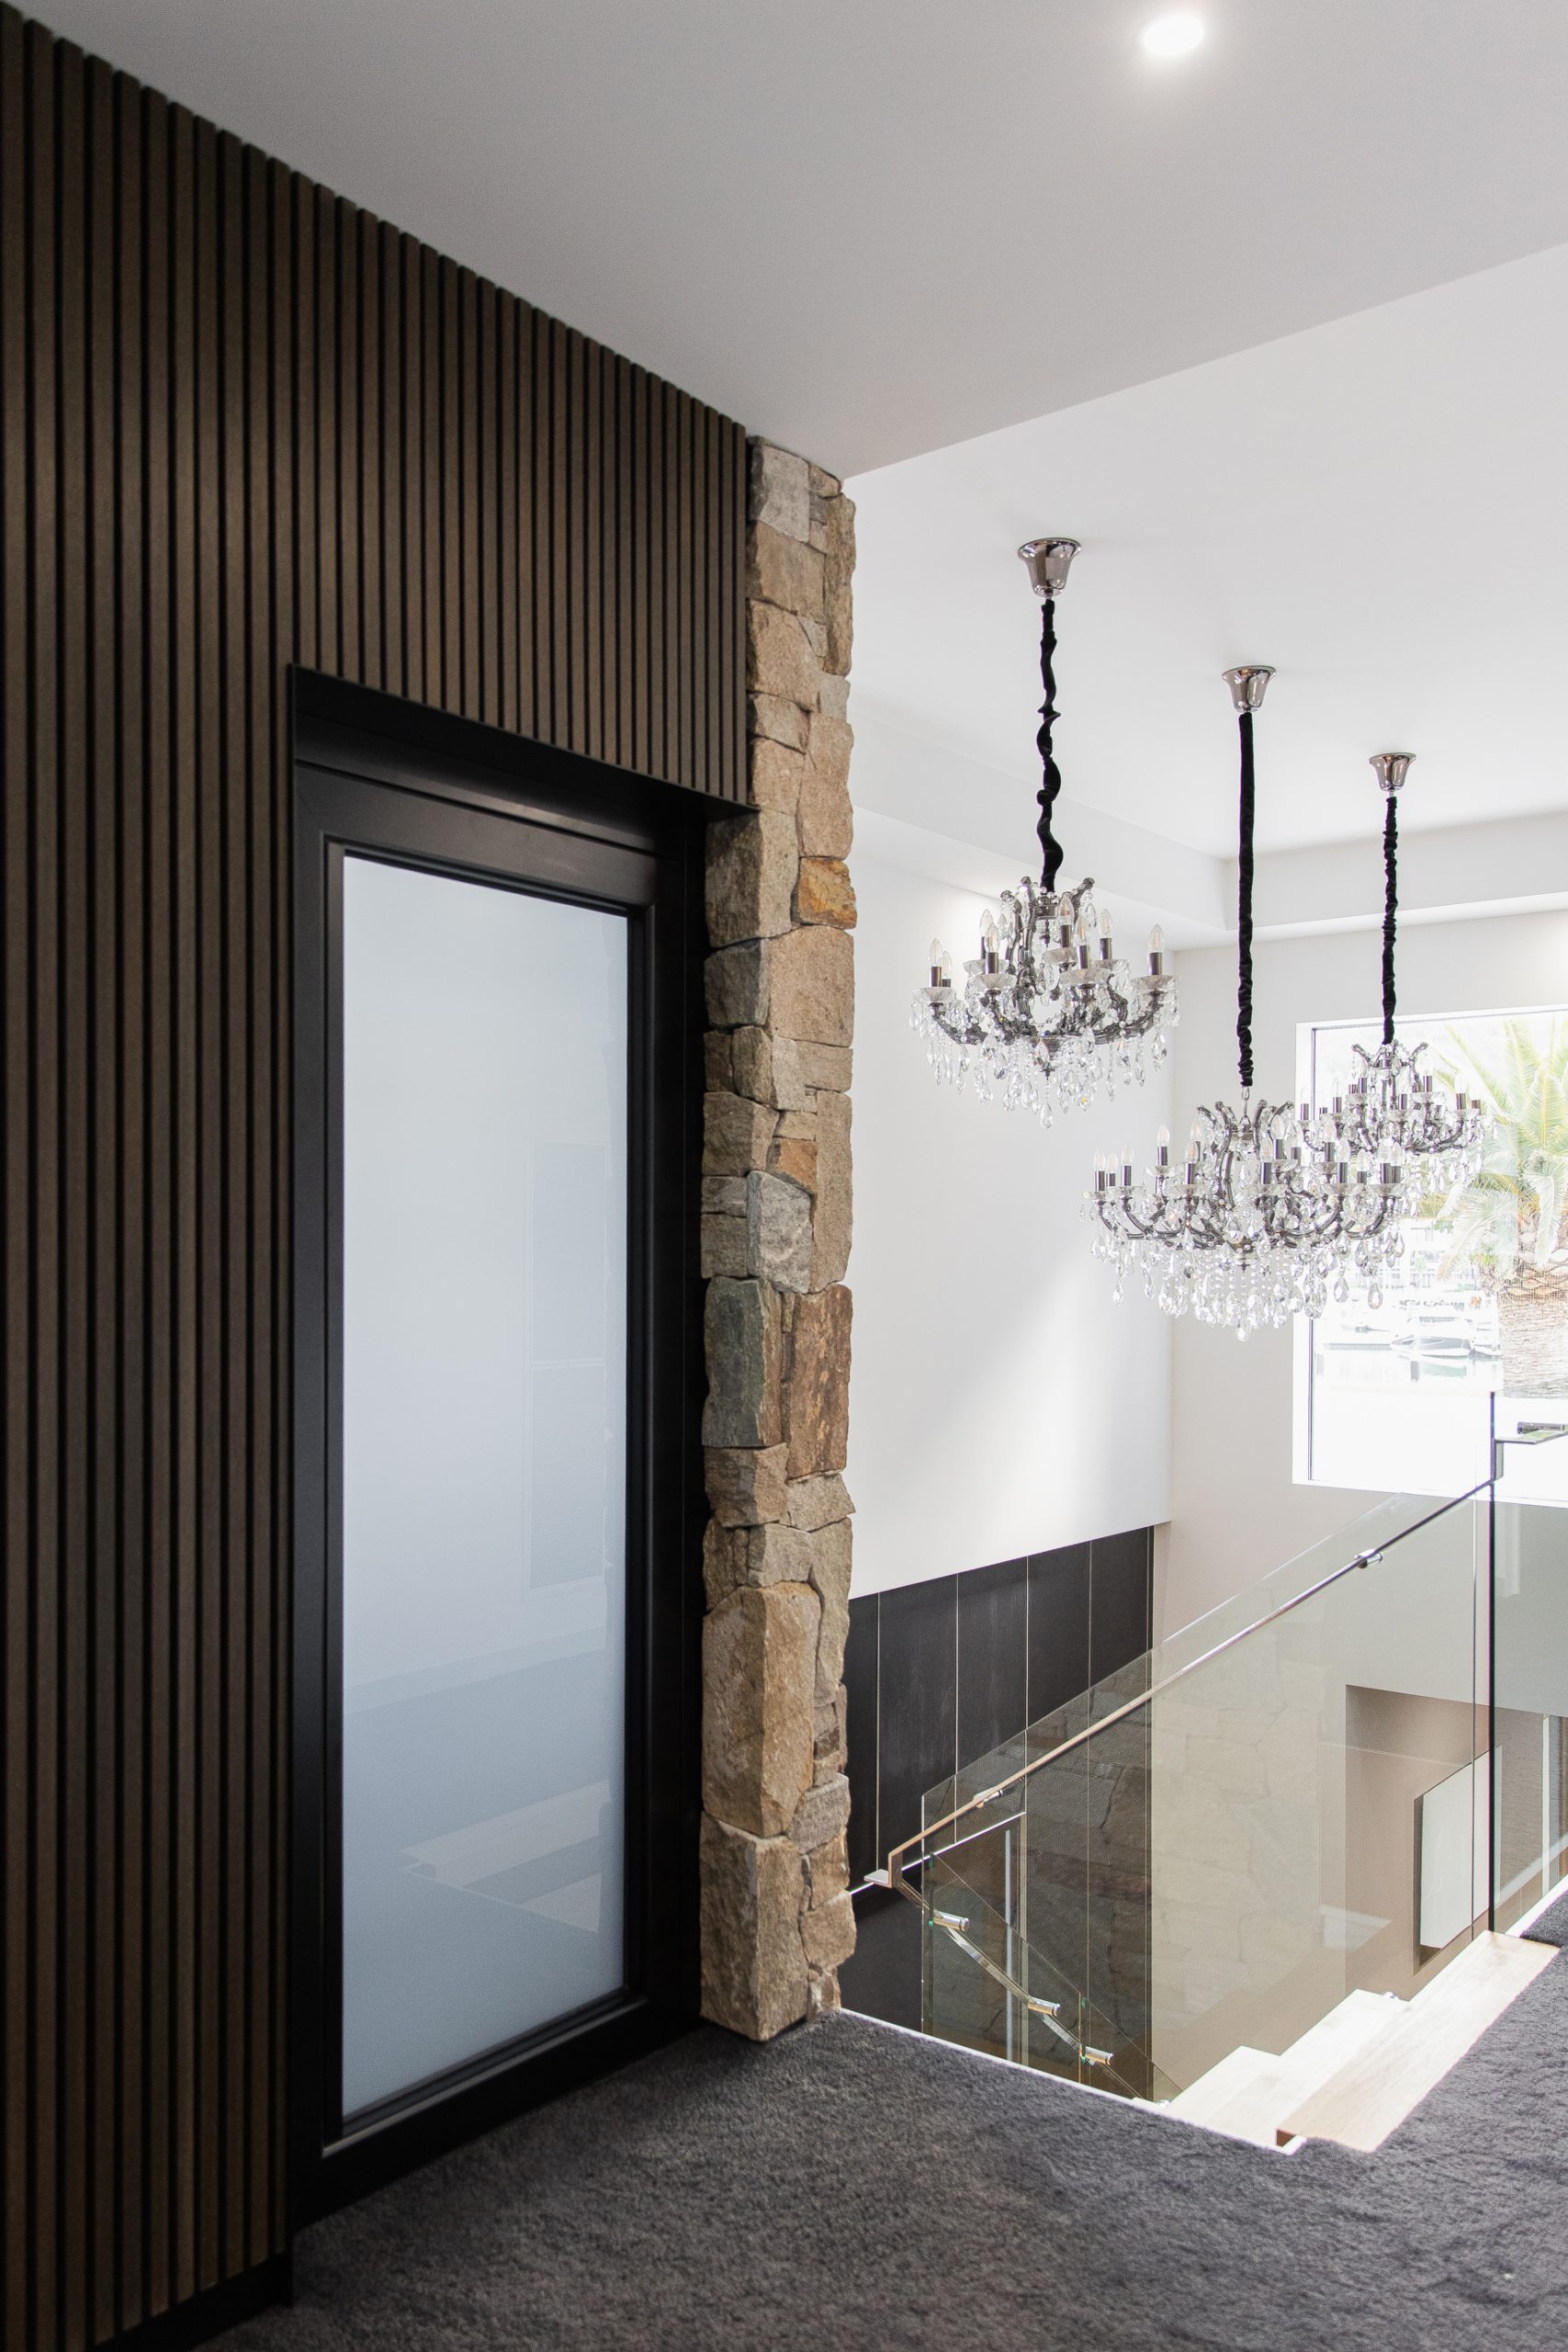 Residential sovereign home lift with a custom stone feature wall